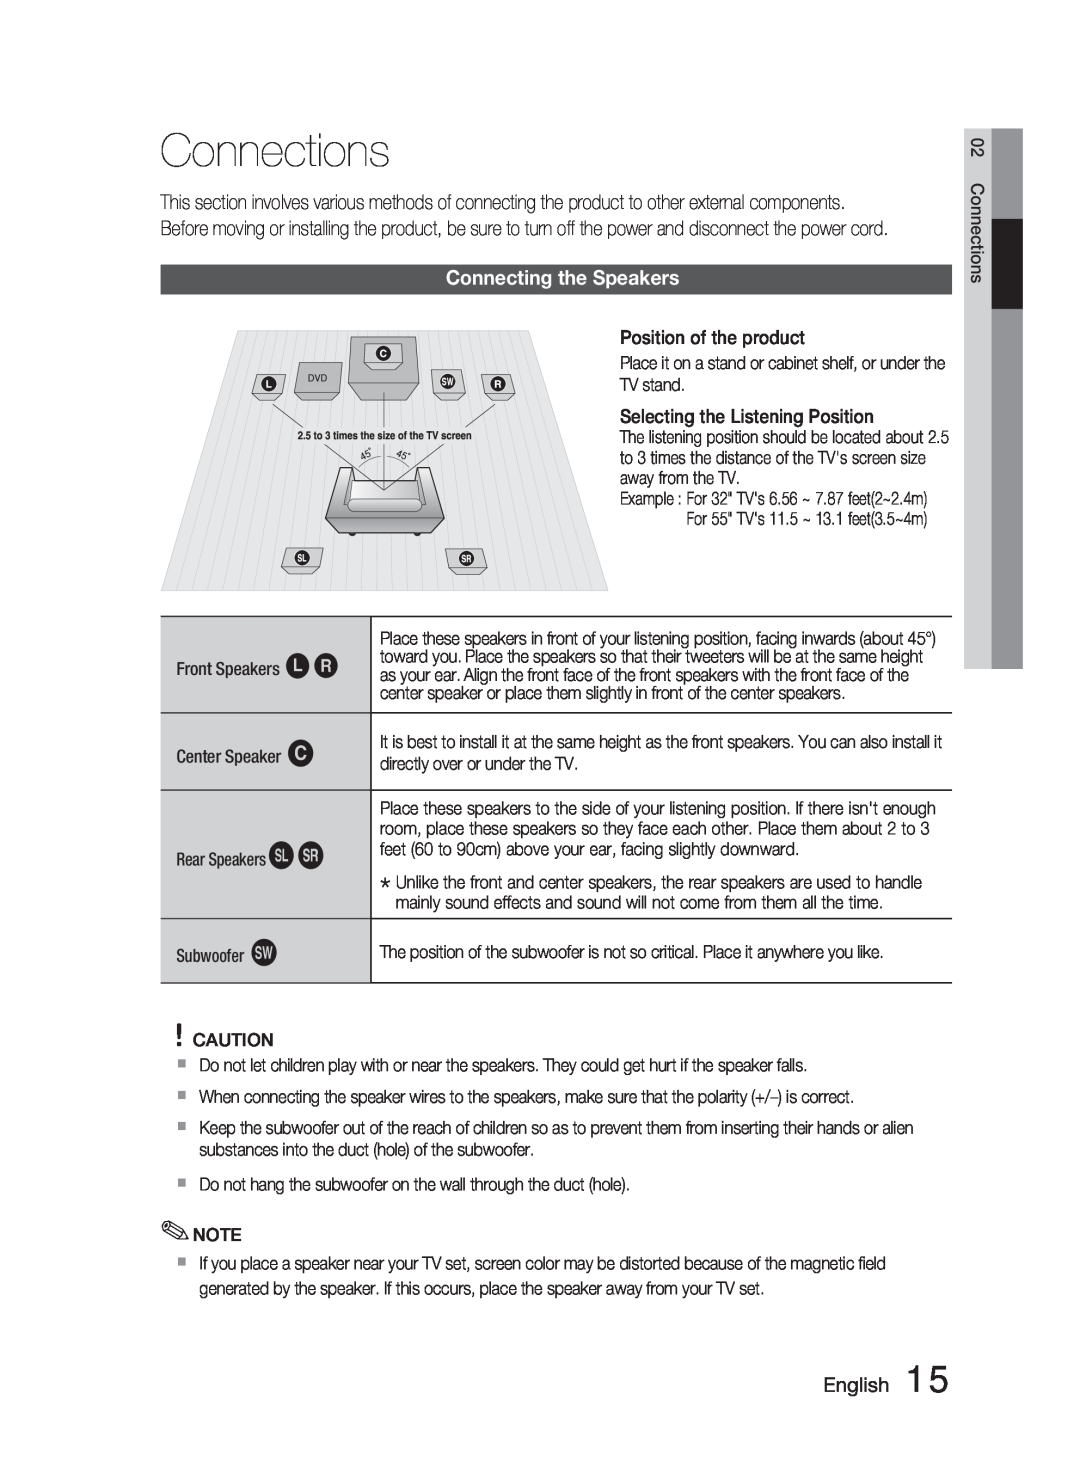 Samsung HT-C550-XAC user manual Connections, Connecting the Speakers, English 